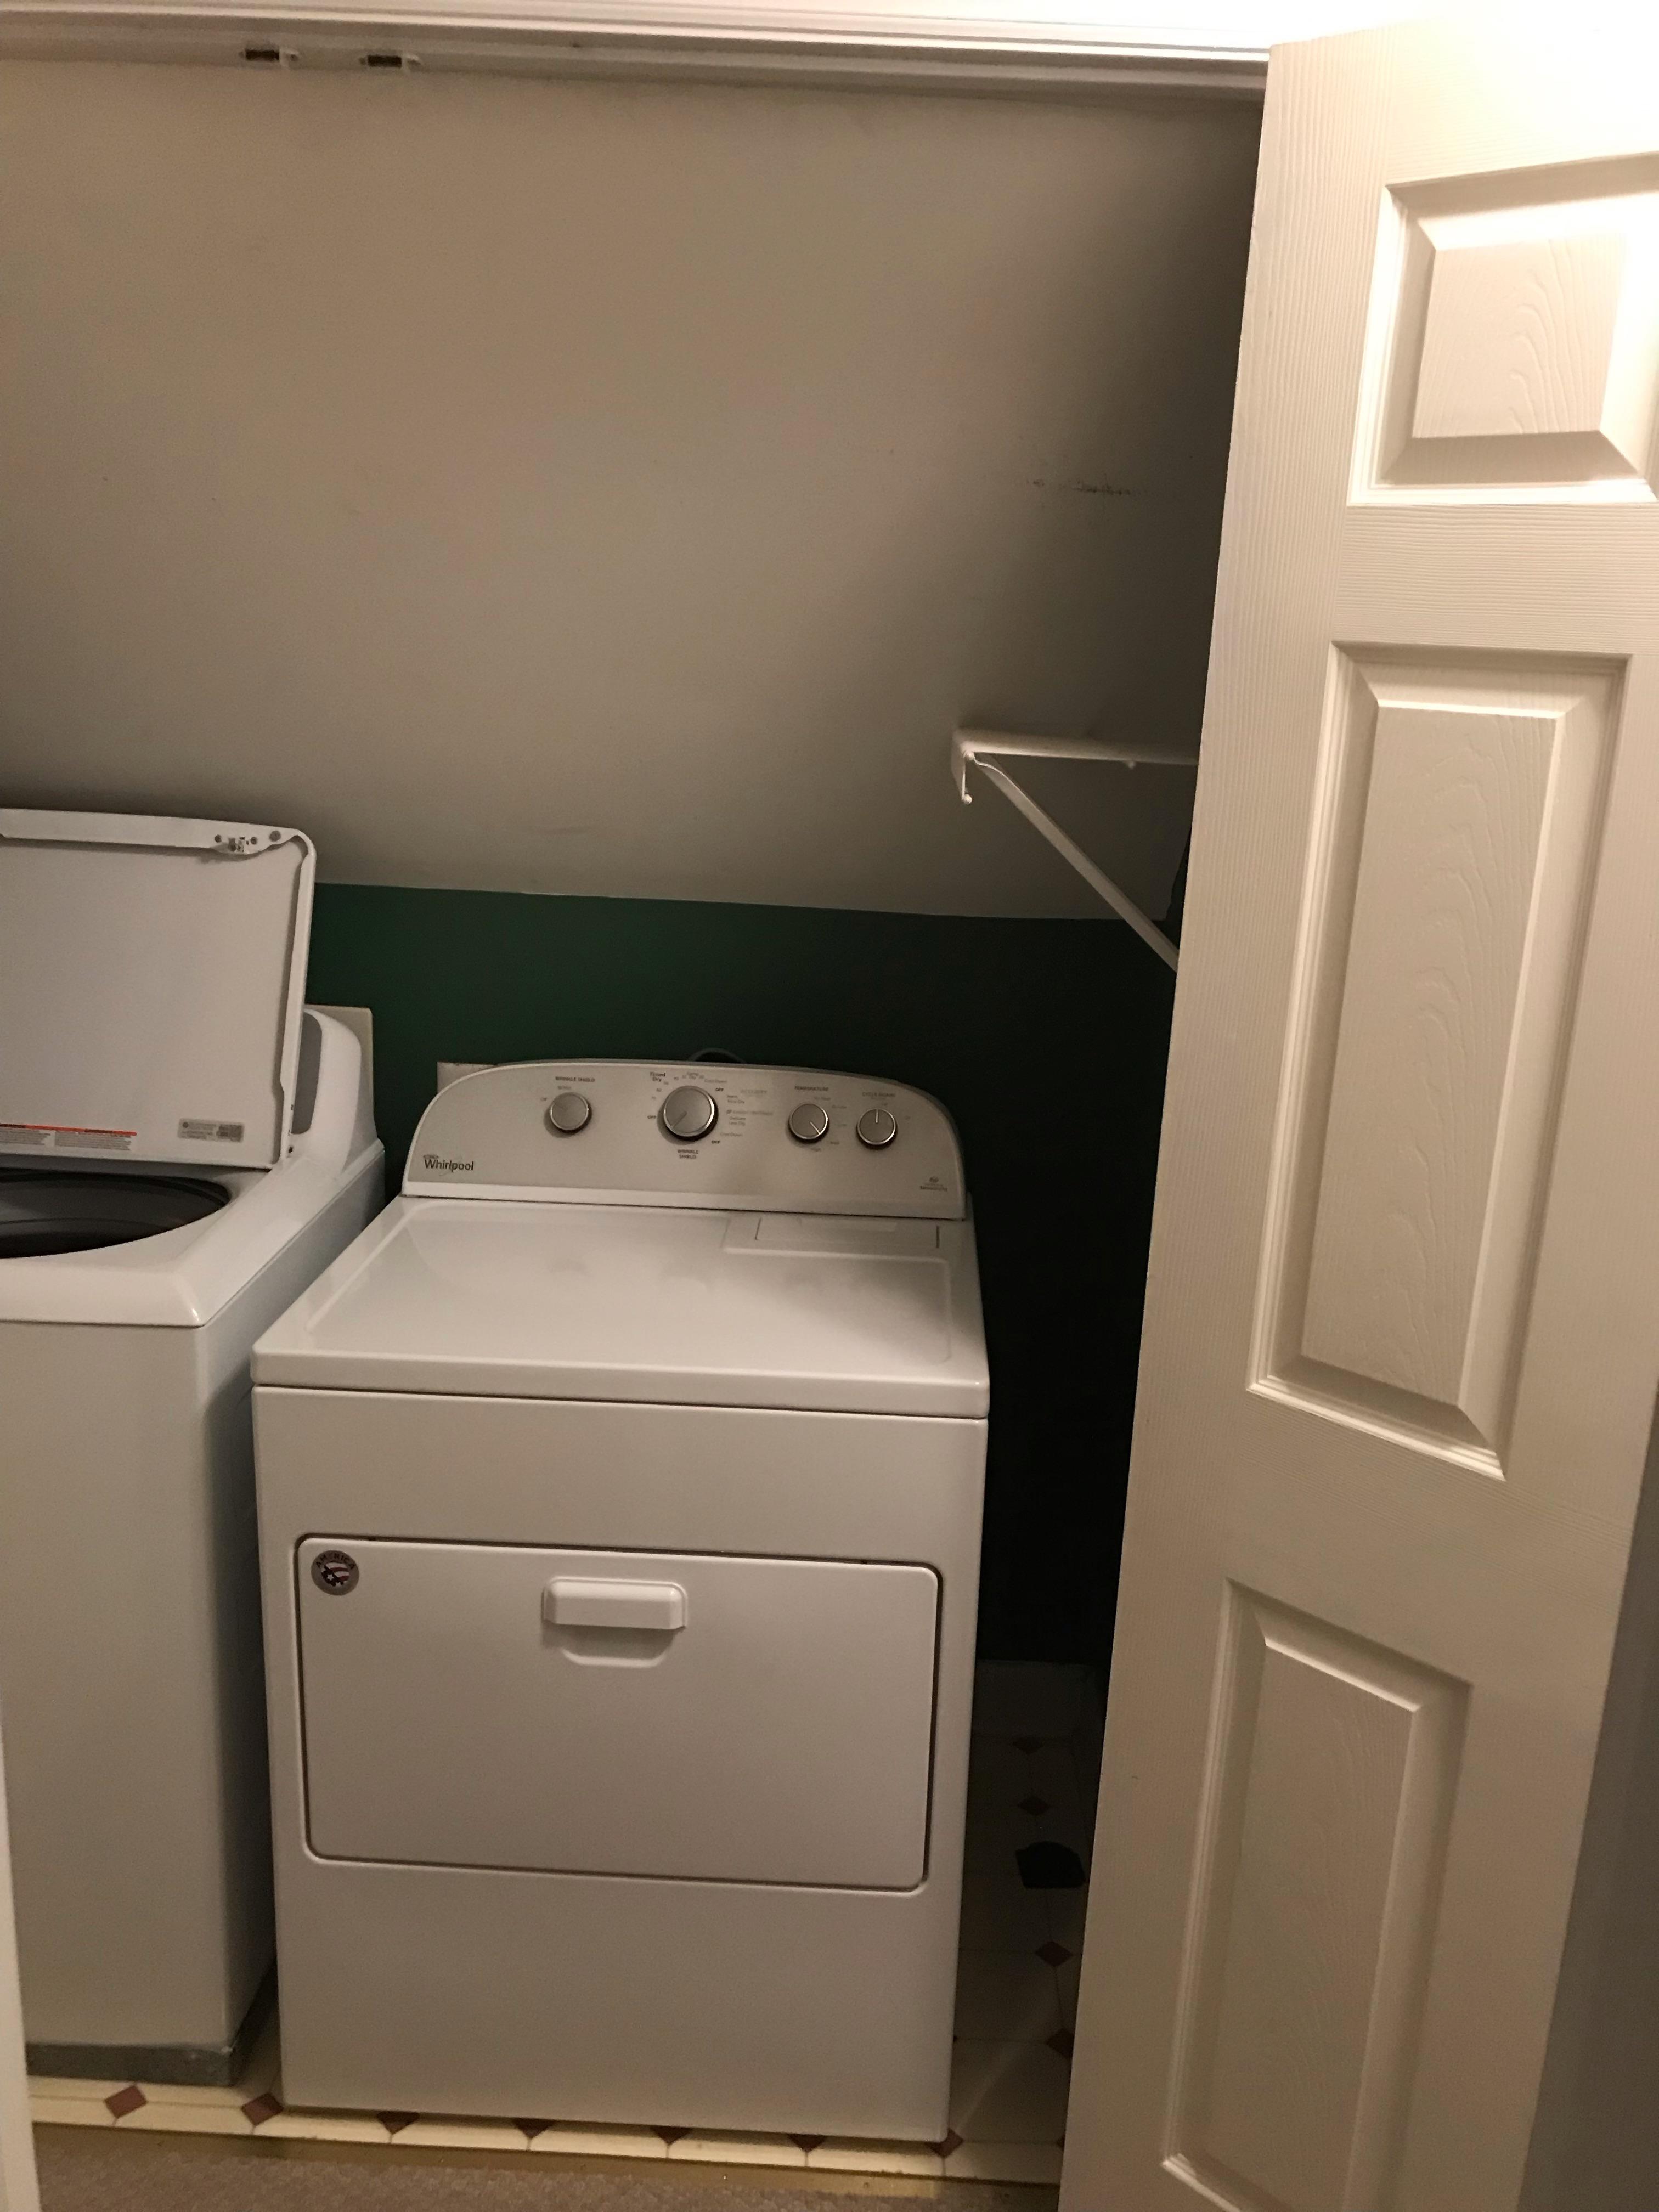 Is it safe to close doors on laundry space?